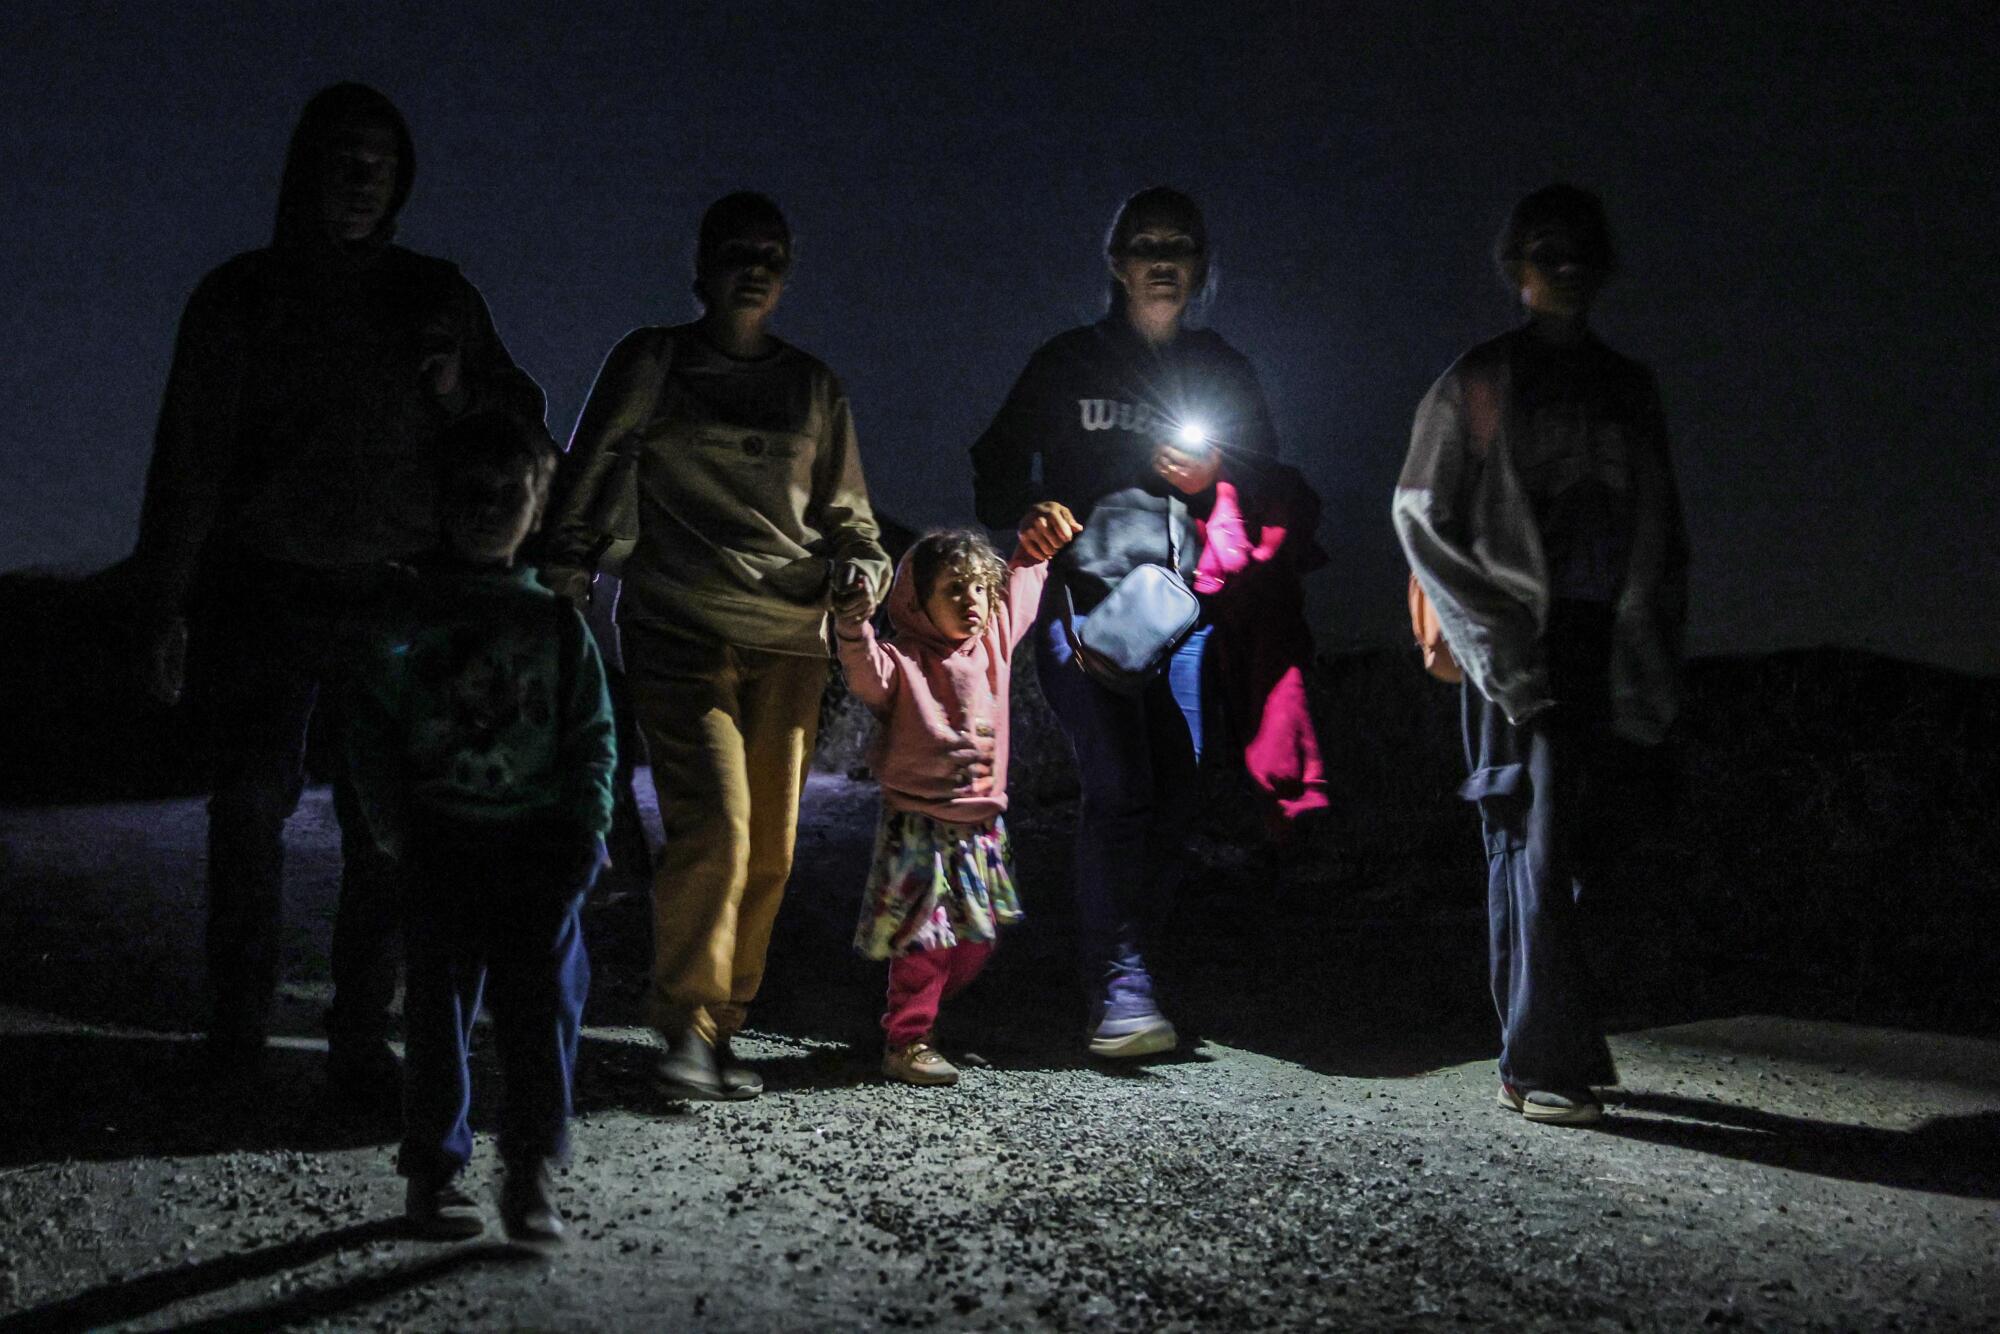 An exhausted family ends a hike of 9 plus hours after crossing the US/Mexico border.